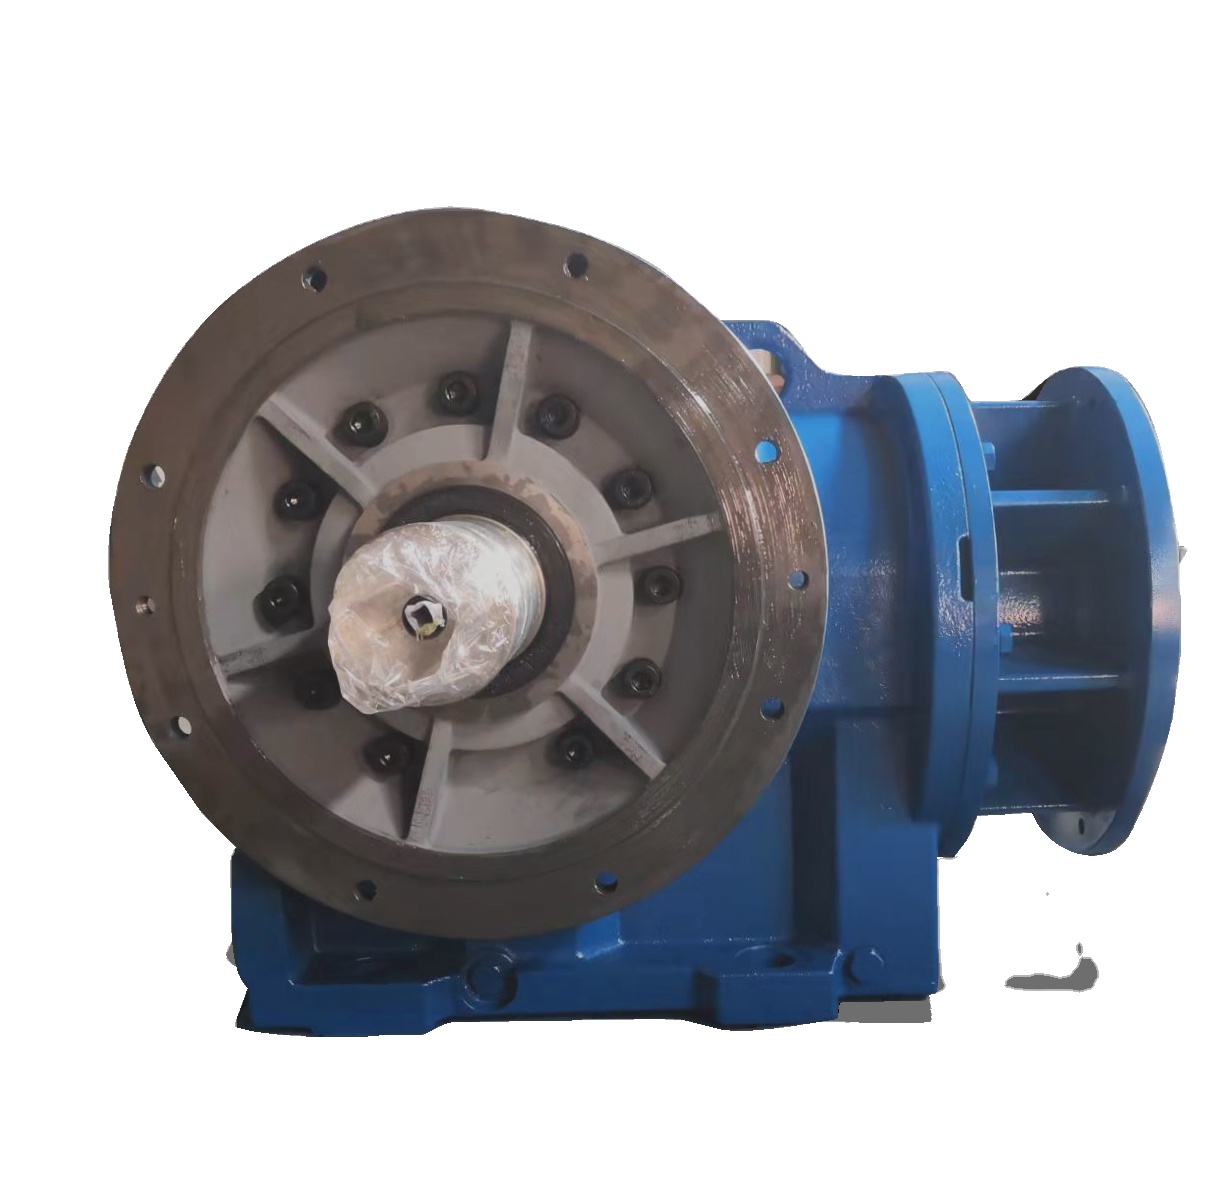 EVERGER WOOD CUTTING SEW-LIKE GEARED MOTOR, GEARBOX, SPEED REDUCERS